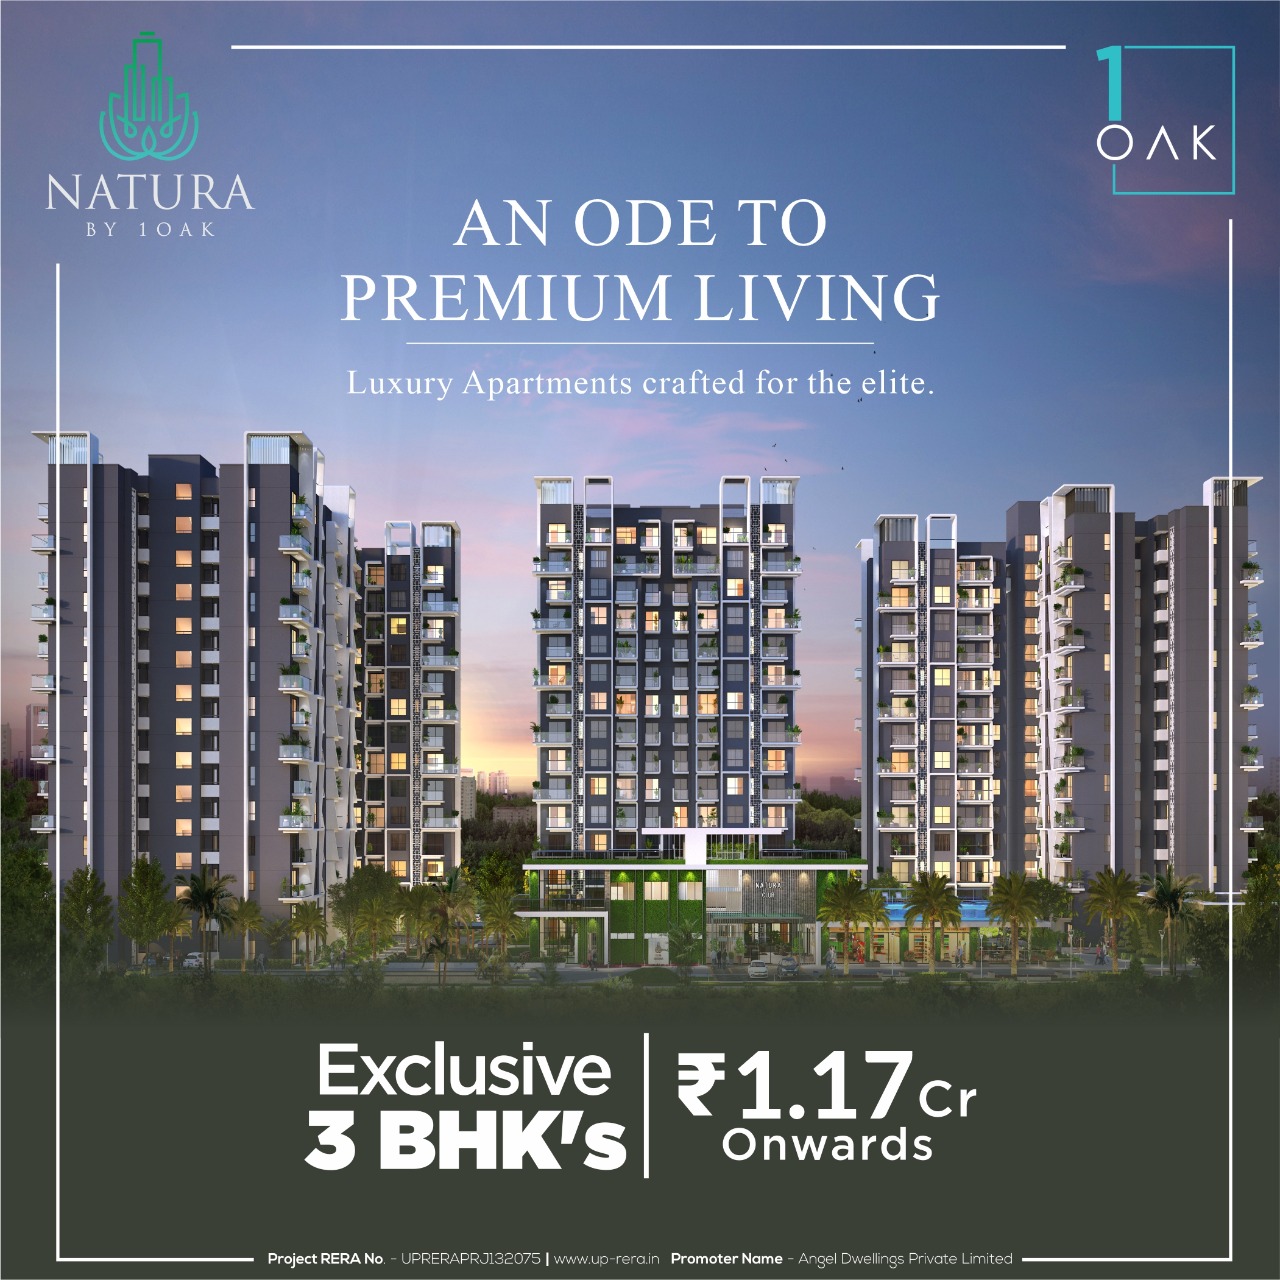 Exclusive 3 BHK Price starting Rs 1.17 Cr at 1OAK Natura, Lucknow